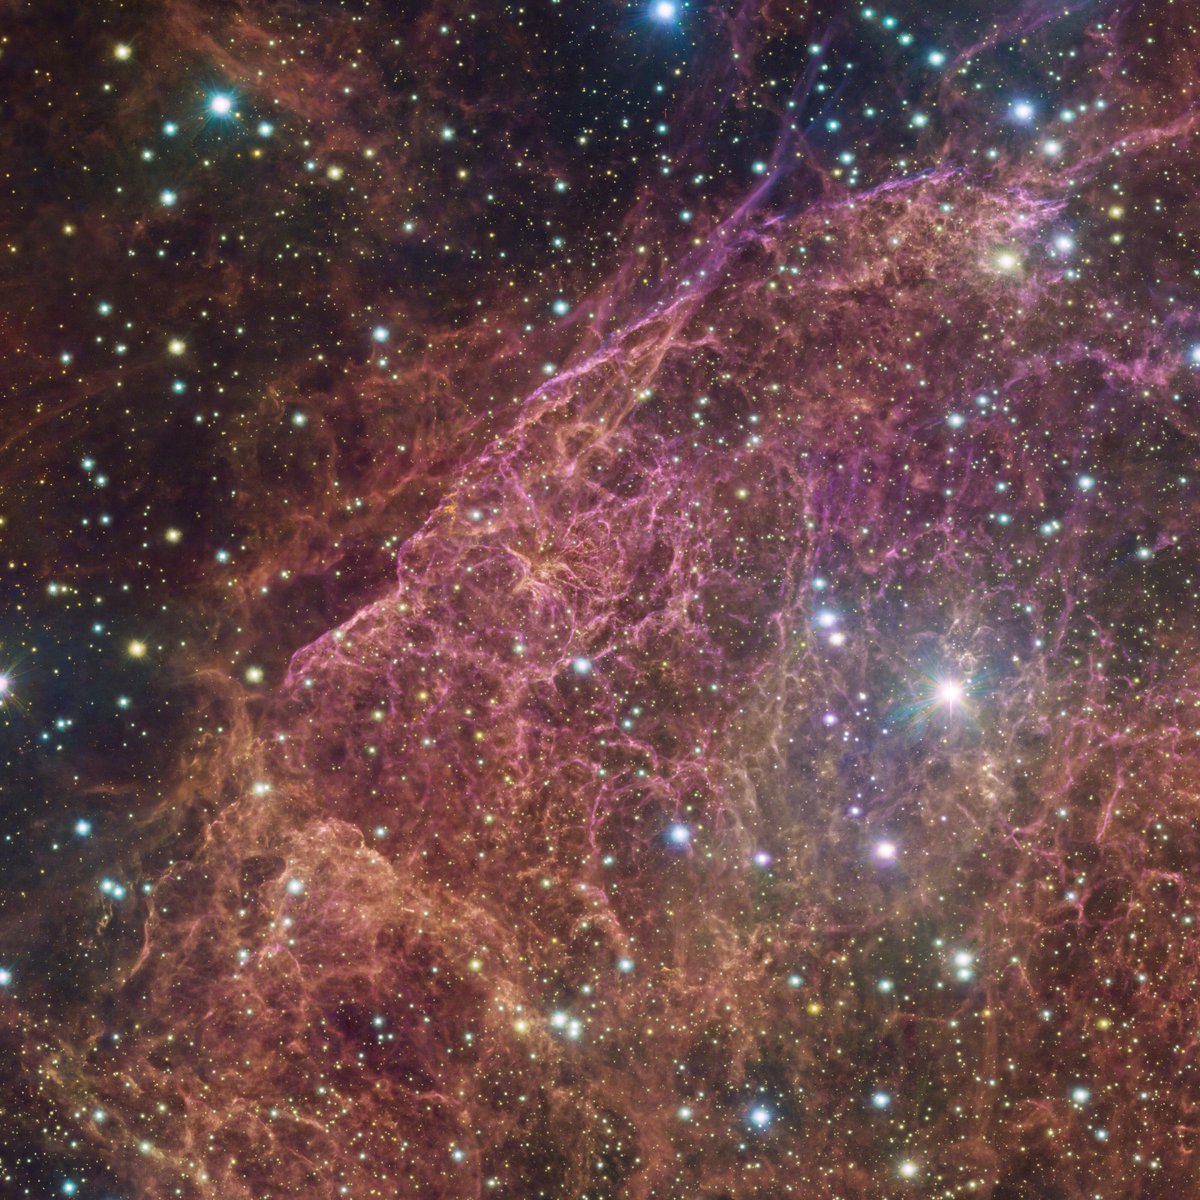 A beautiful spectacle in Vela constellation The filaments and clouds are remnants of a supernova explosion 11,000 years ago Despite being 800 light-years away, it's among the nearest remnants to us (Credit: ESO/VPHAS+ team. Acknowledgement: Cambridge Astronomical Survey Unit)